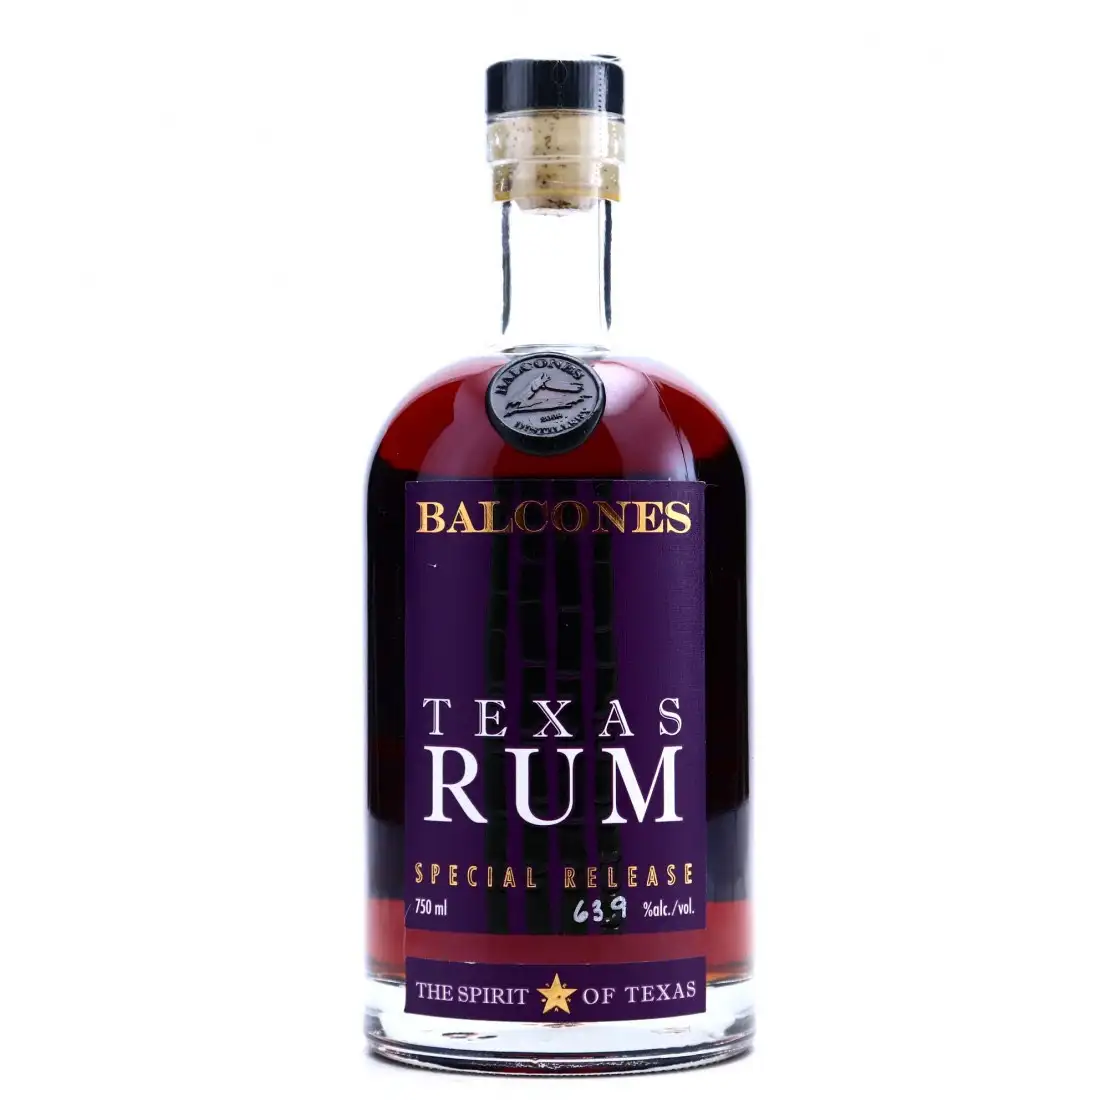 Image of the front of the bottle of the rum Texas Rum